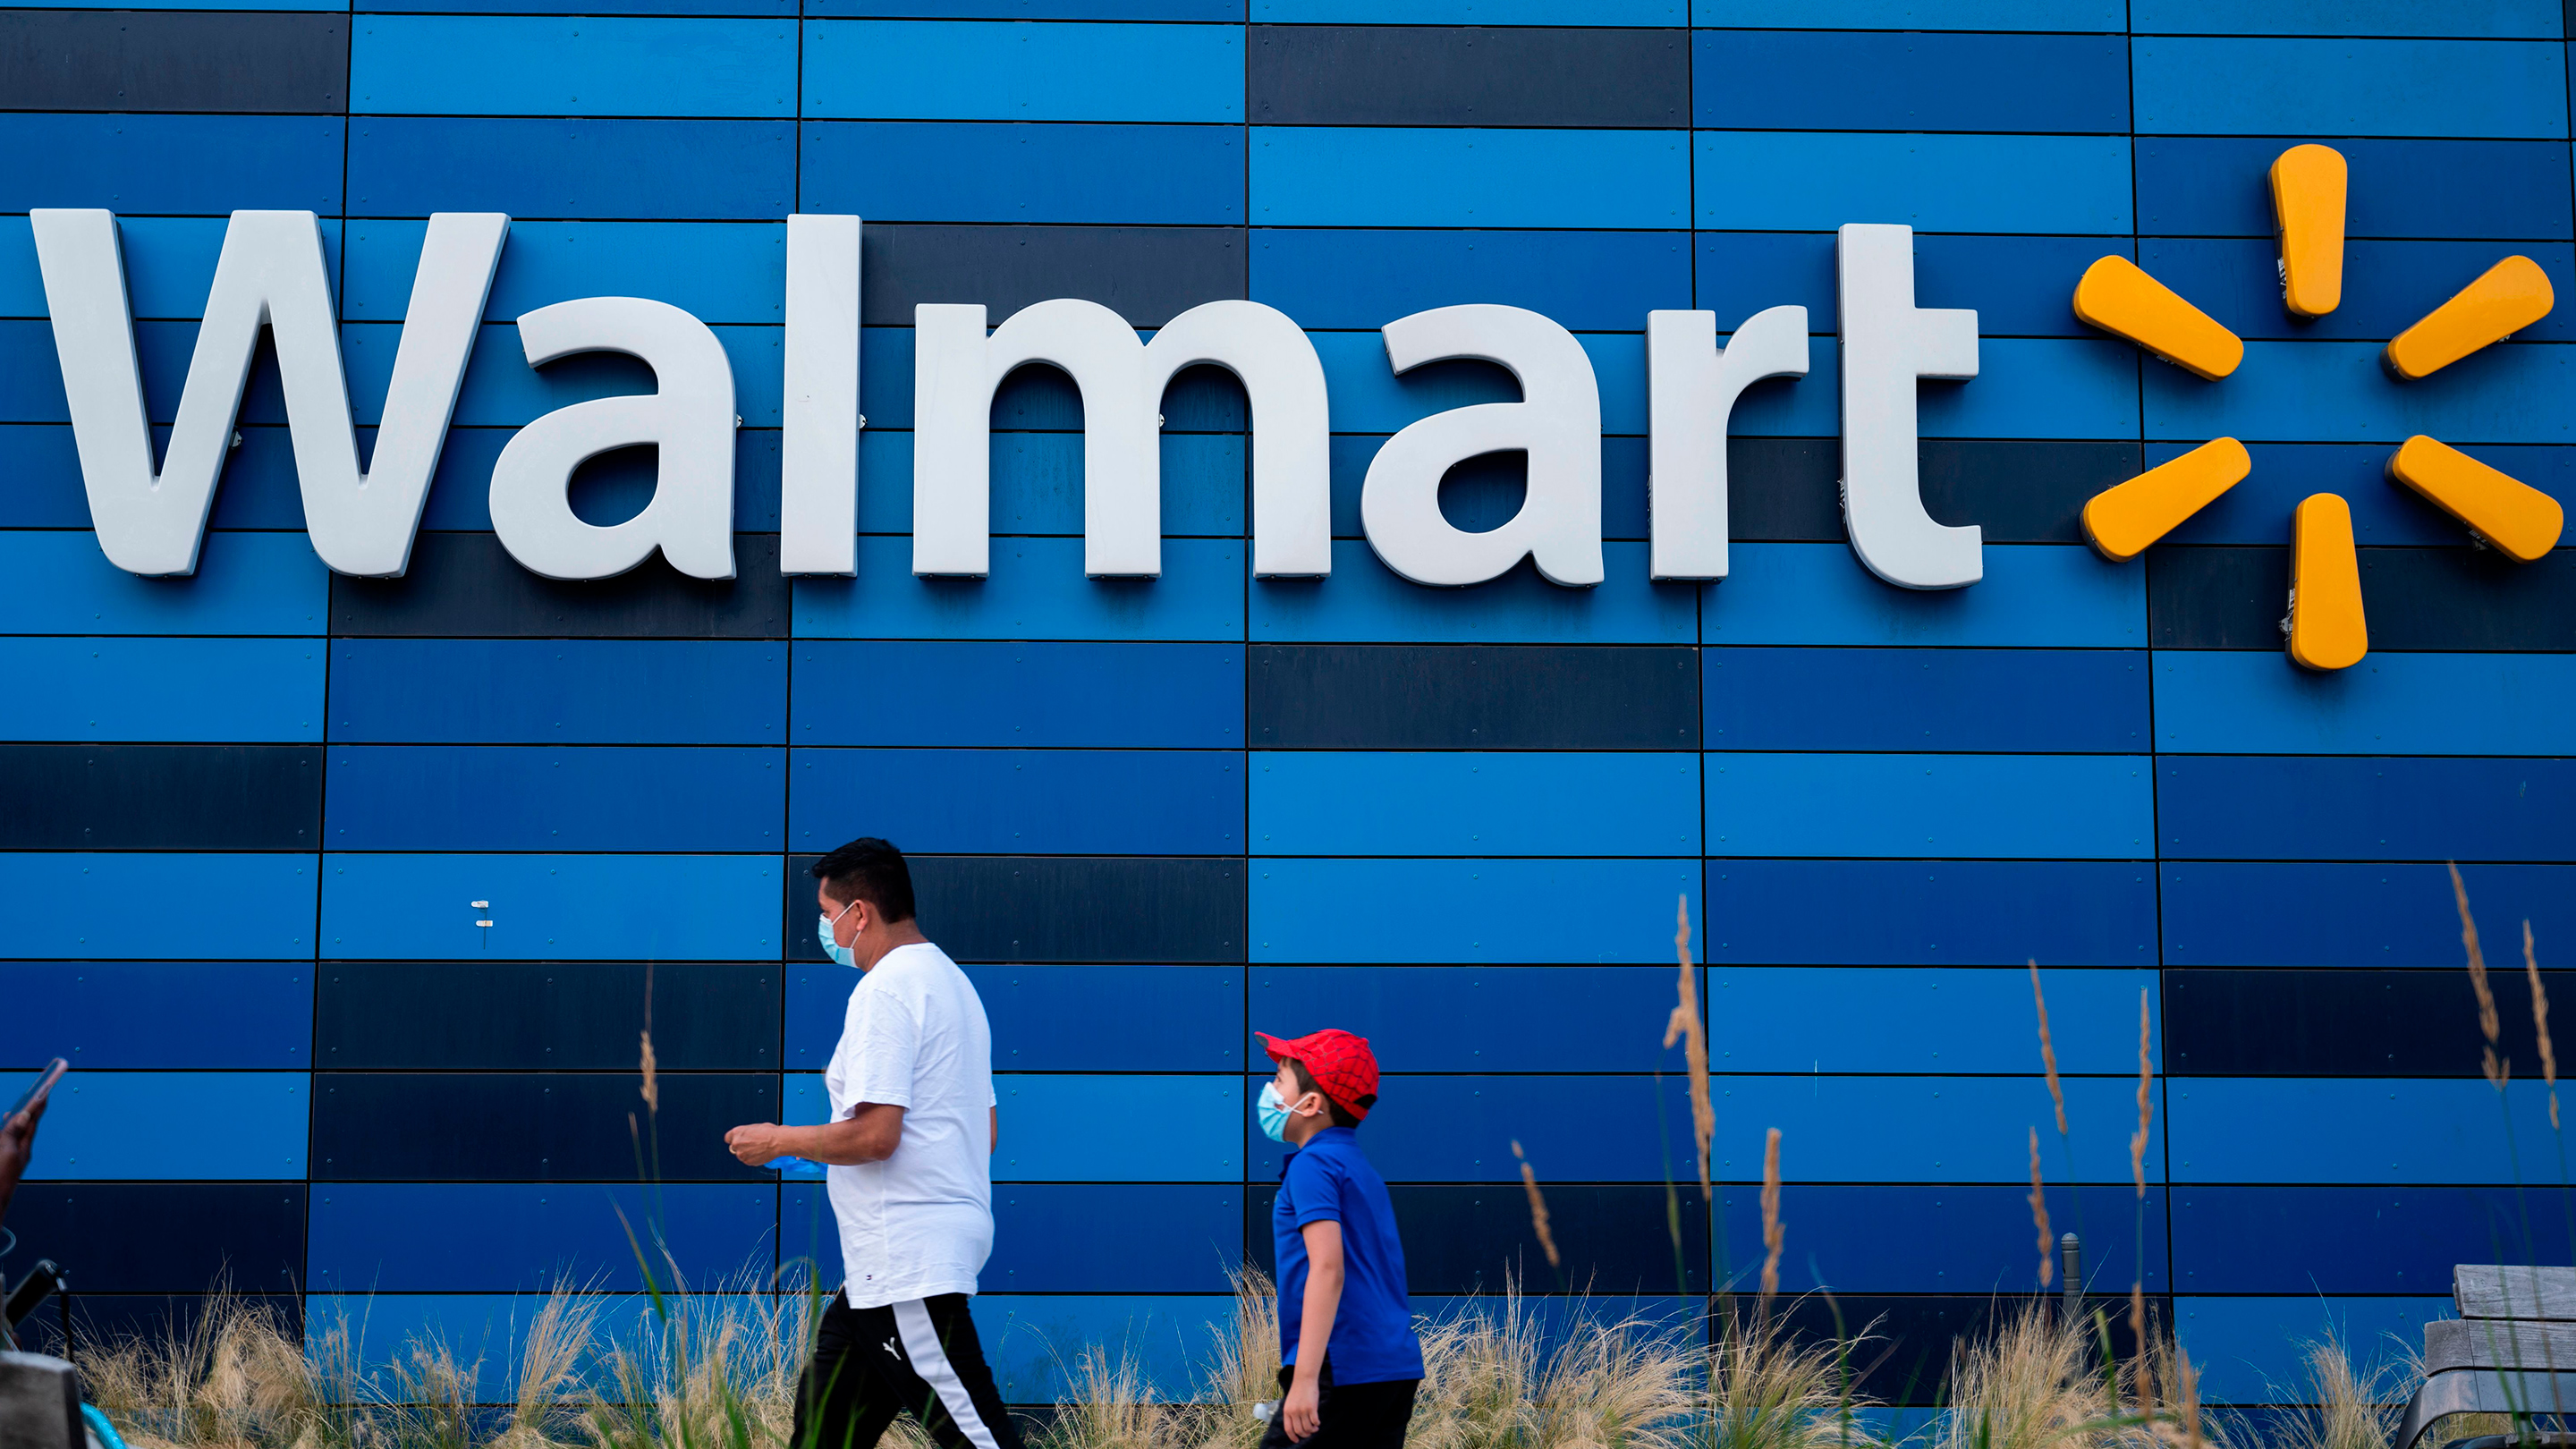 Walmart was prepared for consumer habits in a pandemic - Marketplace